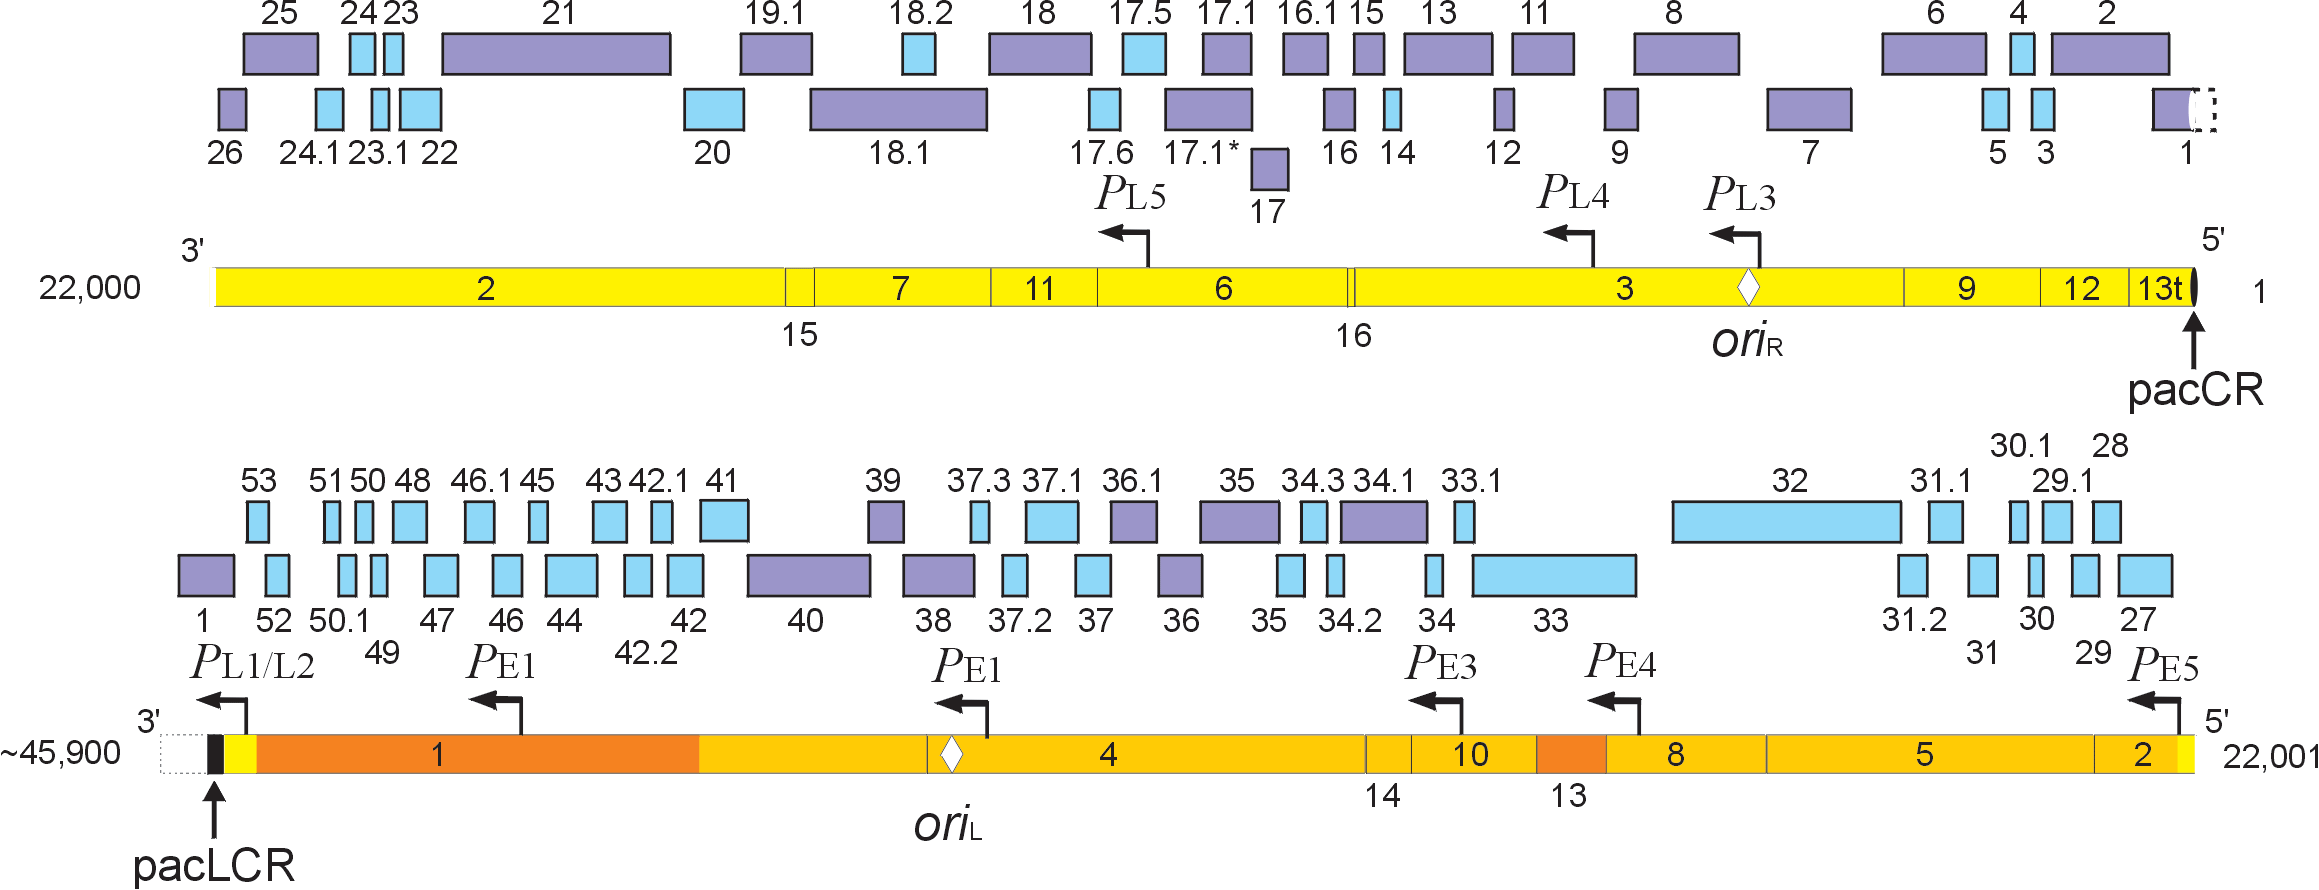 Figure 23-3: The bacteriophage SPP1 mature chromosome. The two main bars denote the mature phage sequence (1 to ~45.9 kb). The upper line of the bar represents the H (heavy) strand and the lower line the L (light) strand. The representation of the 16 EcoRI DNA fragments, the dispensable, early and late gene regions, early and late promoters; oriL and oriR, are according to figure 23-2. Fragment EcoRI-13t has one end generated by EcoRI digestion and the other by cleavage at the pac site by the terminase enzyme. The pac region is located within EcoRI DNA fragment 1 (uncleaved: pacLCR, solid black box indicated by vertical arrow). The cleaved pac site (pacCR, solid black oval, indicated by a vertical arrow) defines the first nucleotide of the SPP1 sequence. To present the full EcoRI DNA fragment 1, the first 718 bp (defining the EcoRI-13t fragment) are shown again in the upper main bar after position 44007 (broken line). Therefore, gene 1 is also presented twice. Due to imprecision of the headful cut mechanism the end of the mature SPP1 chromosome (~45.9 kb) is not precisely defined. The numbered hatched boxes denote phage-encoded products that have been genetically or biochemically characterized, whereas the empty ones indicate those of unknown function (3).